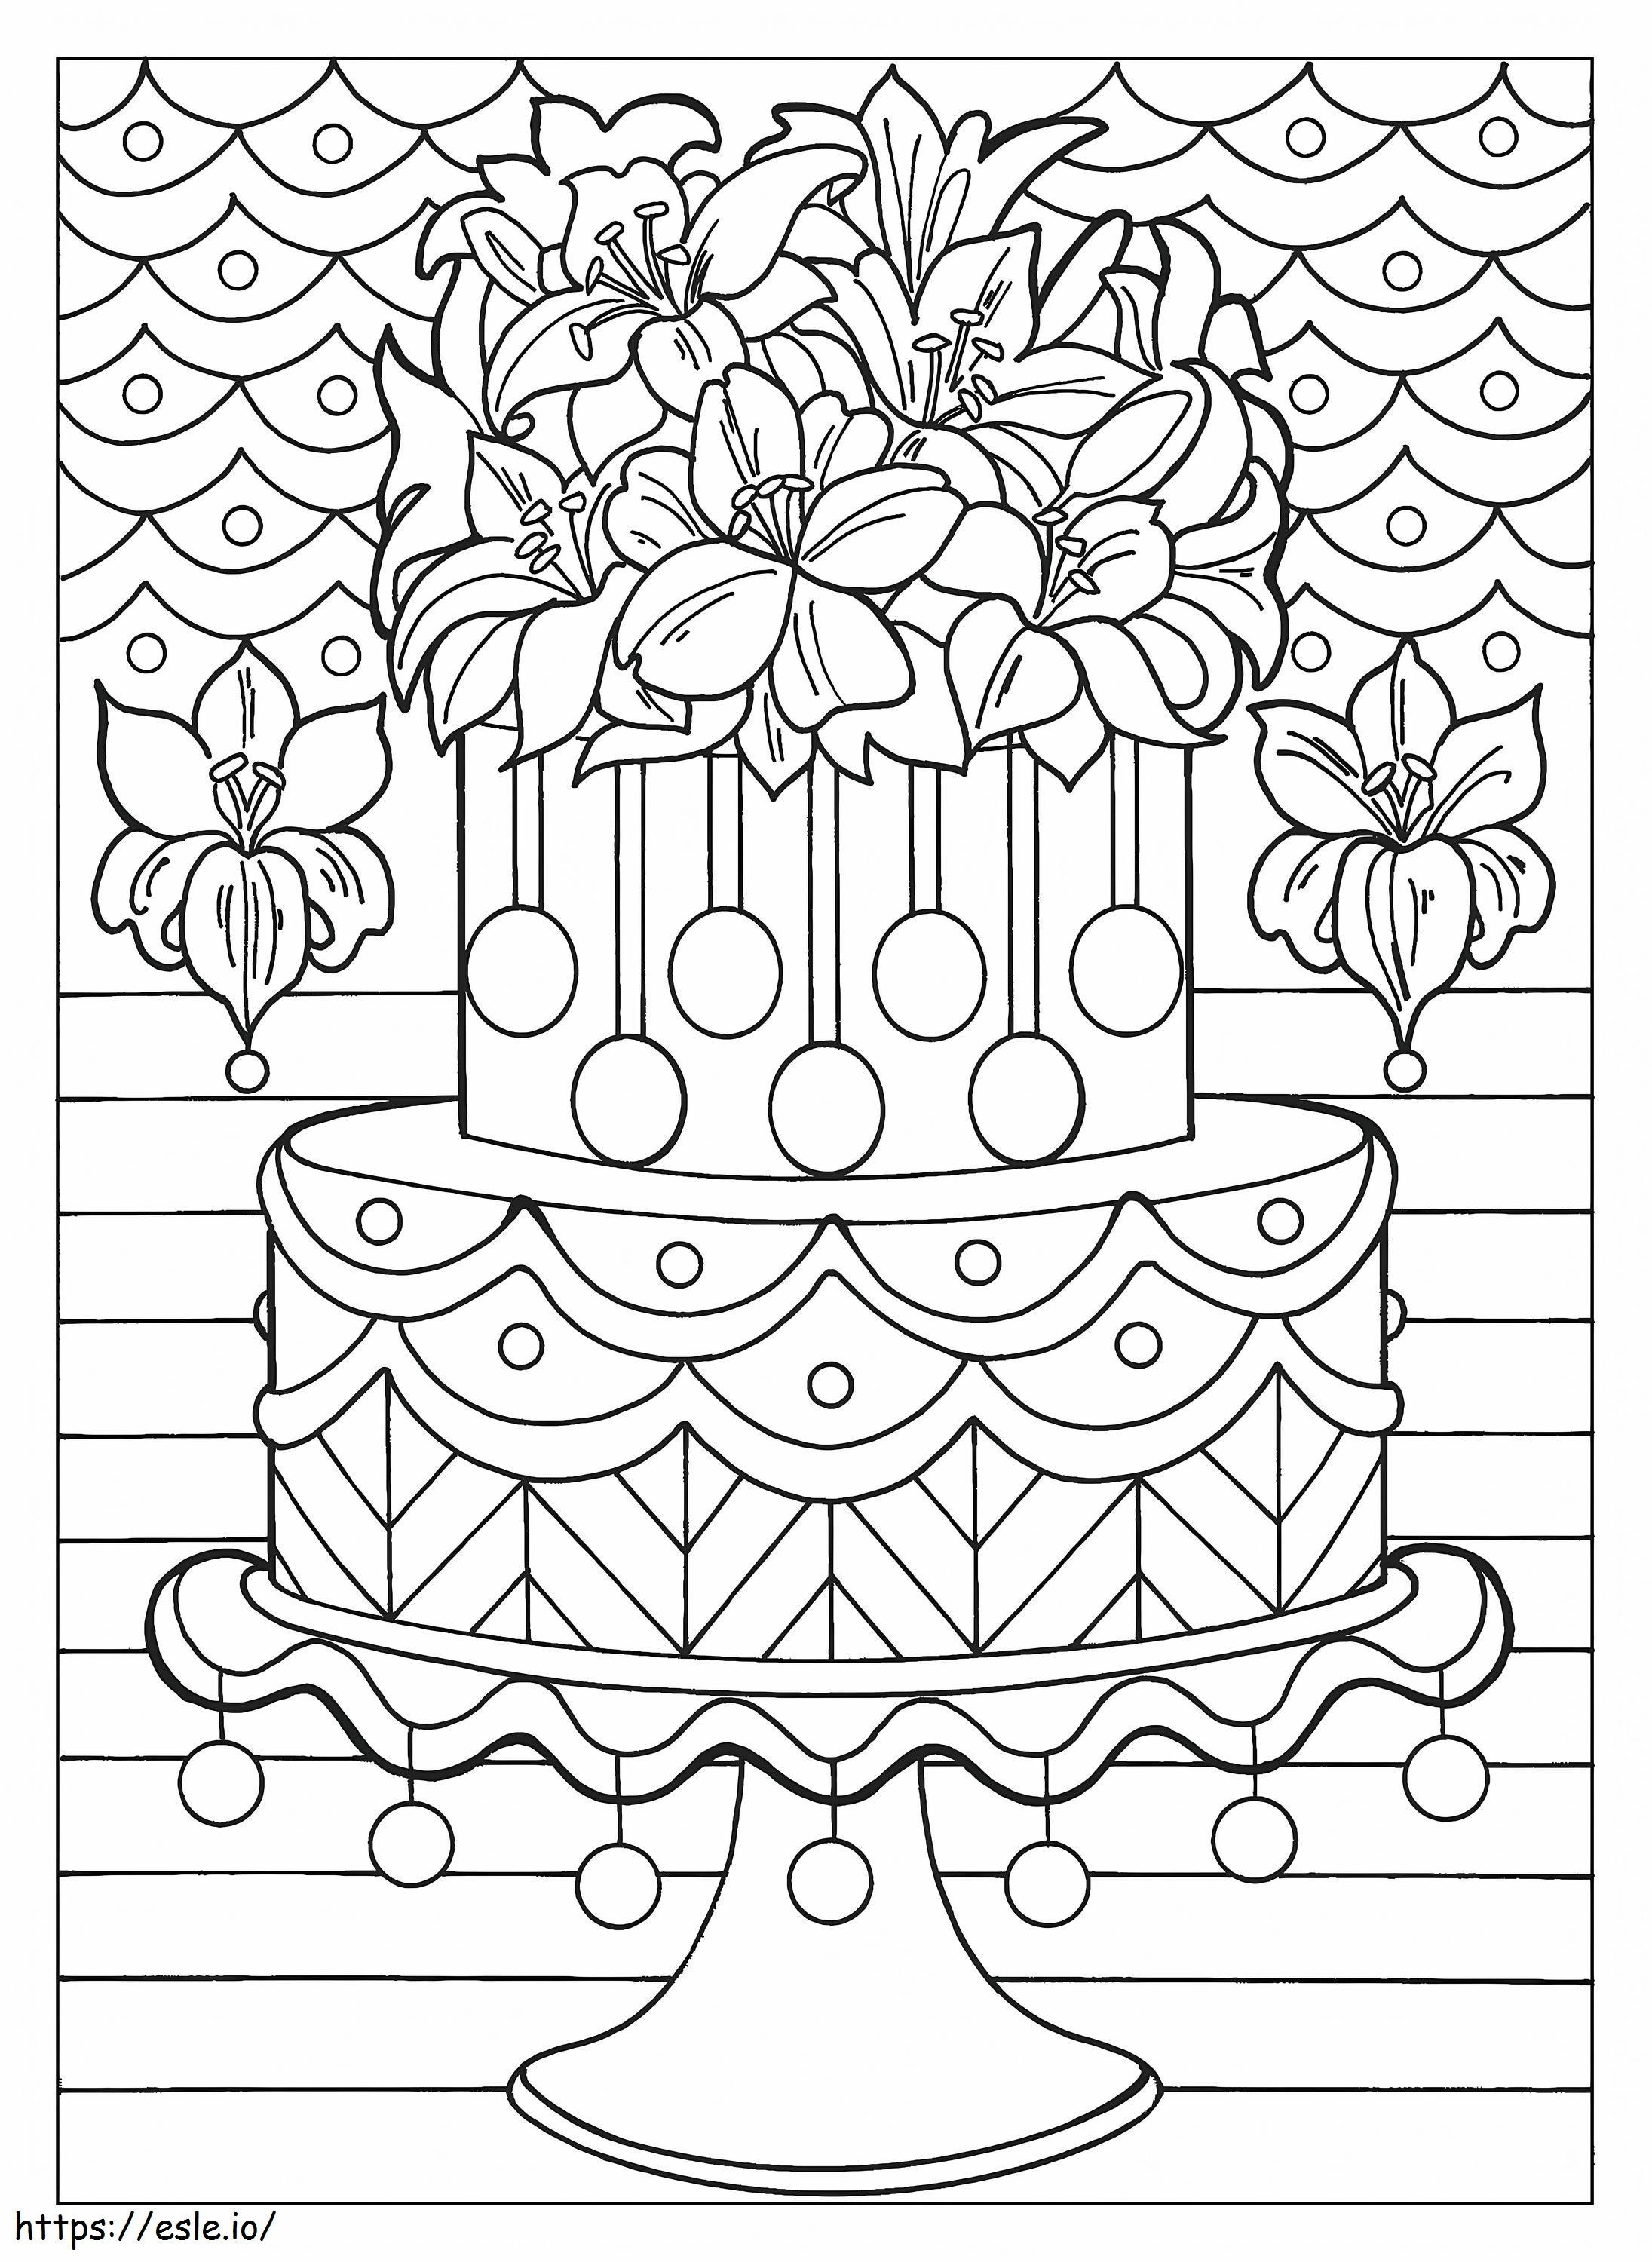 Cake Dessert coloring page